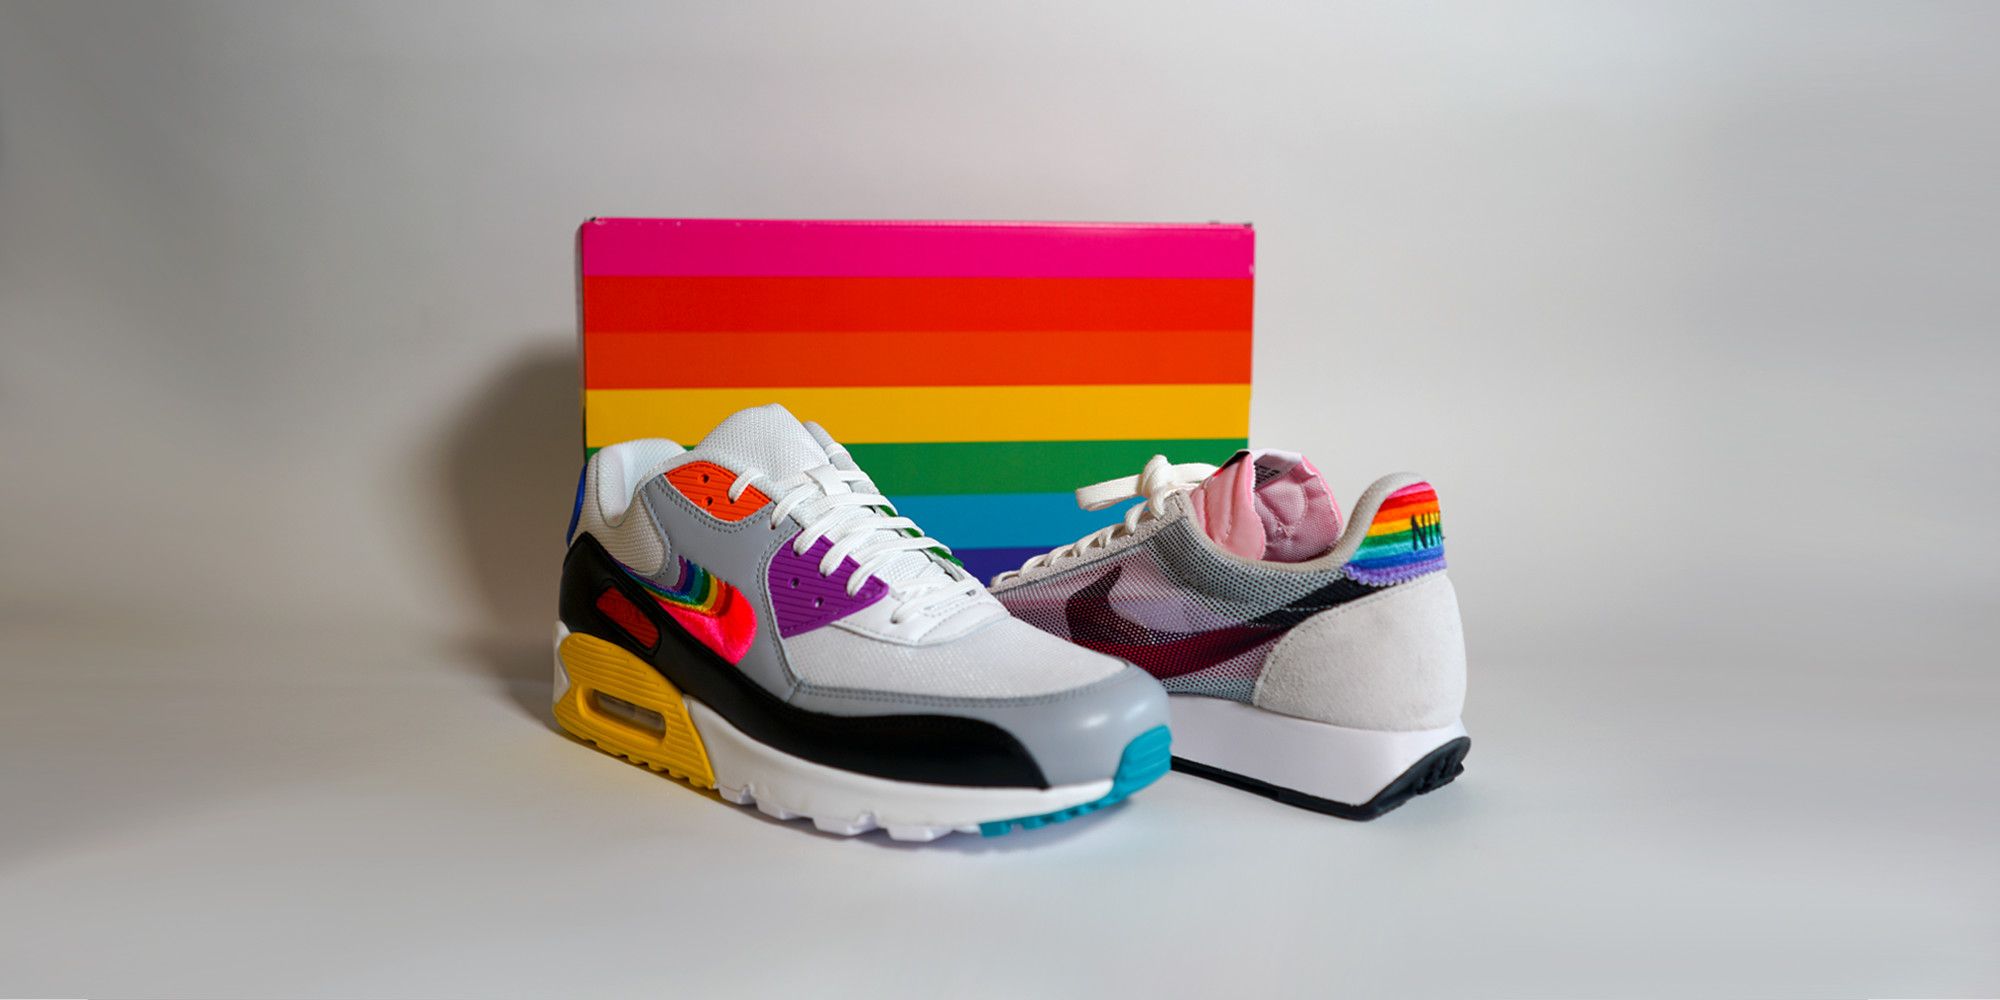 Vriend Burgerschap Zonnebrand Nike BETRUE Air Max 90 and Tailwind 79 Sneakers - The Story of Nike's Be  True Collaboration with Gilbert Baker